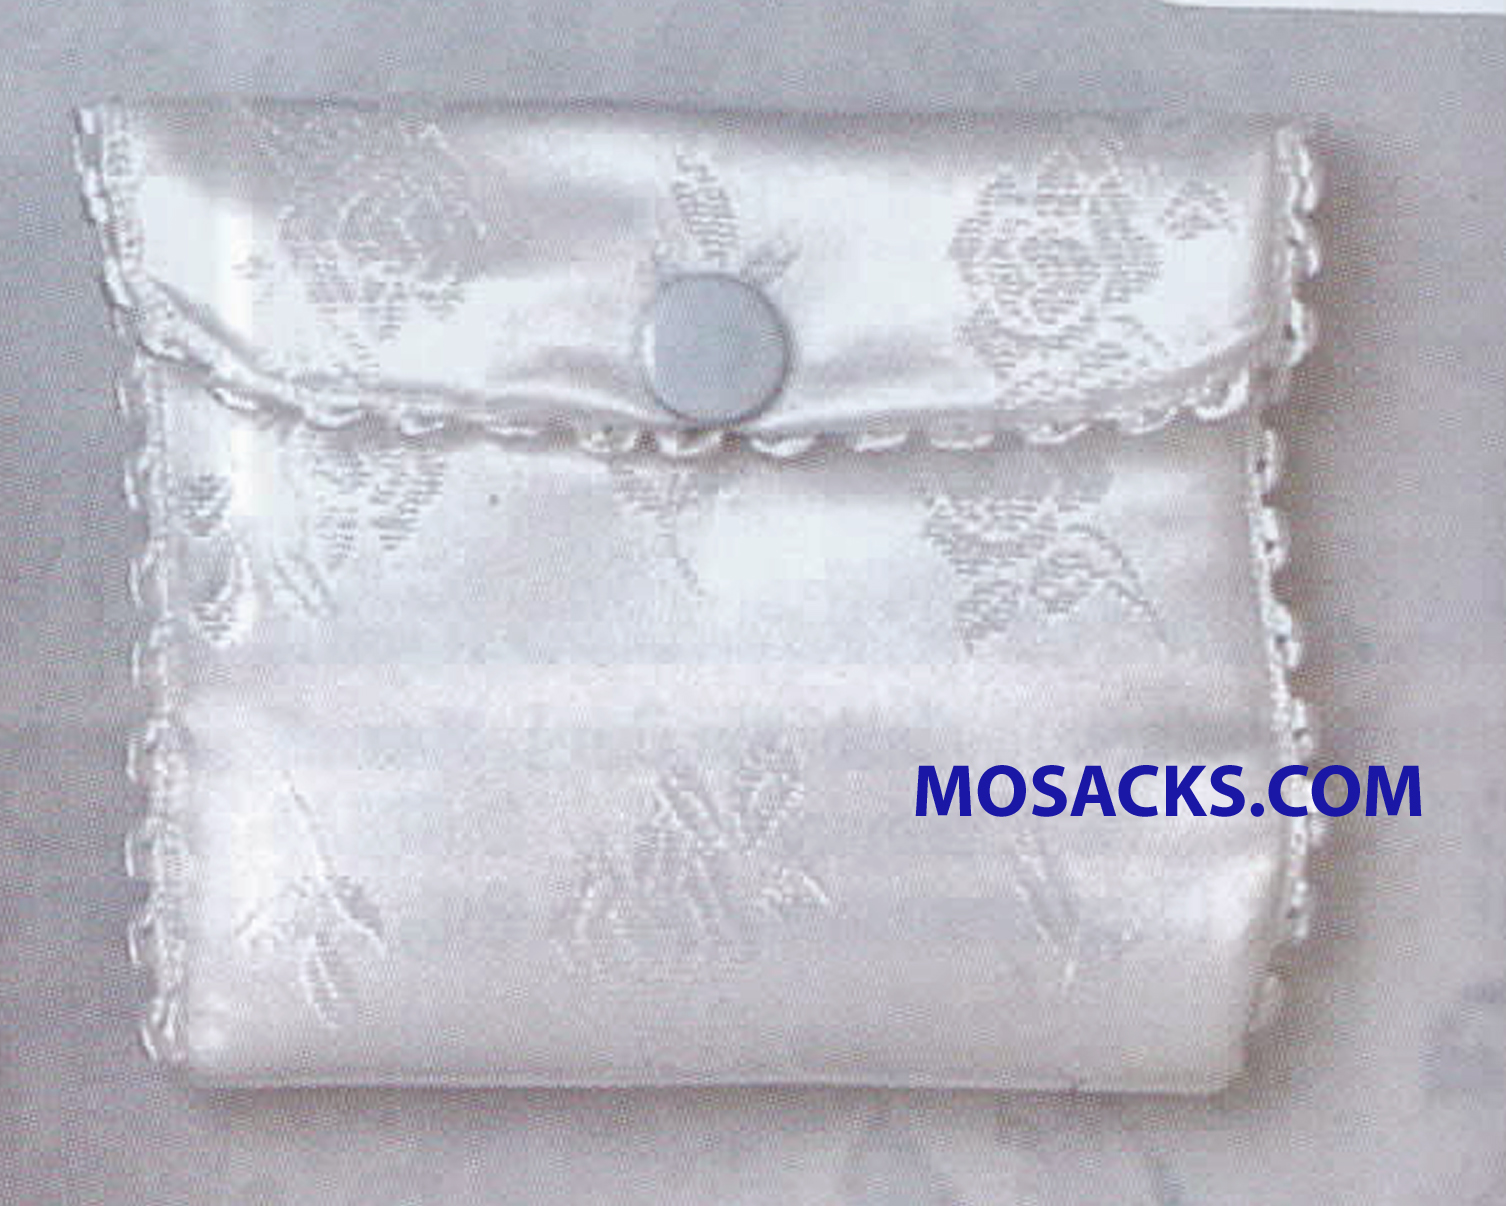 Embroidered White Satin Rosary Case with Flower Design and Snap Closure Measures 3” x 2.5”.